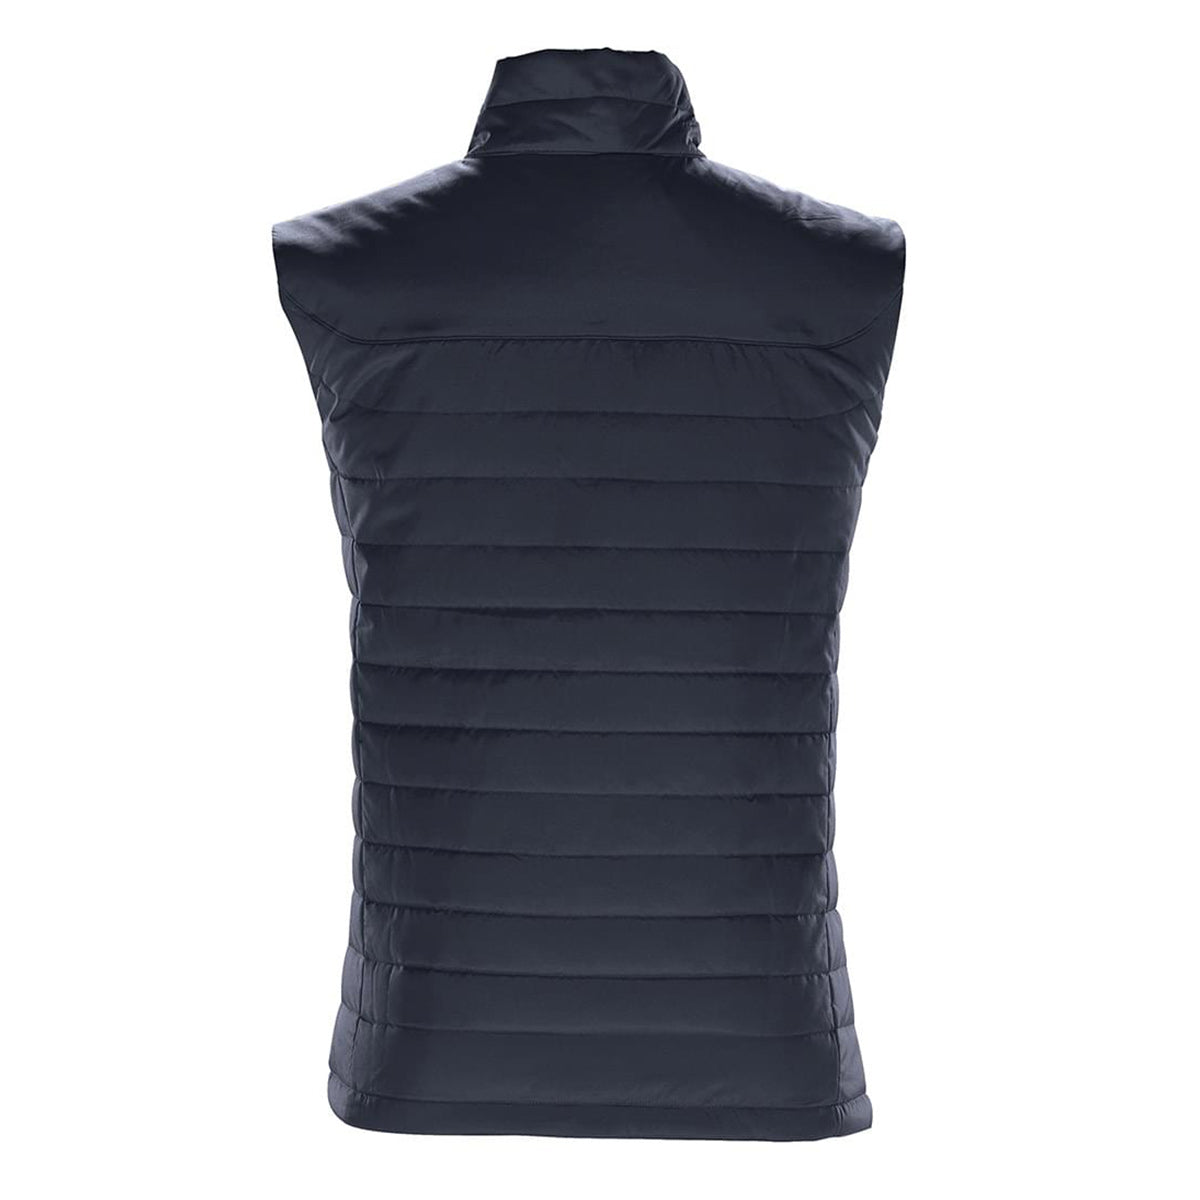 Men's Sleeveless Quilted Vest Jacket Outwear Down Body Padded Coat Winter  Warm